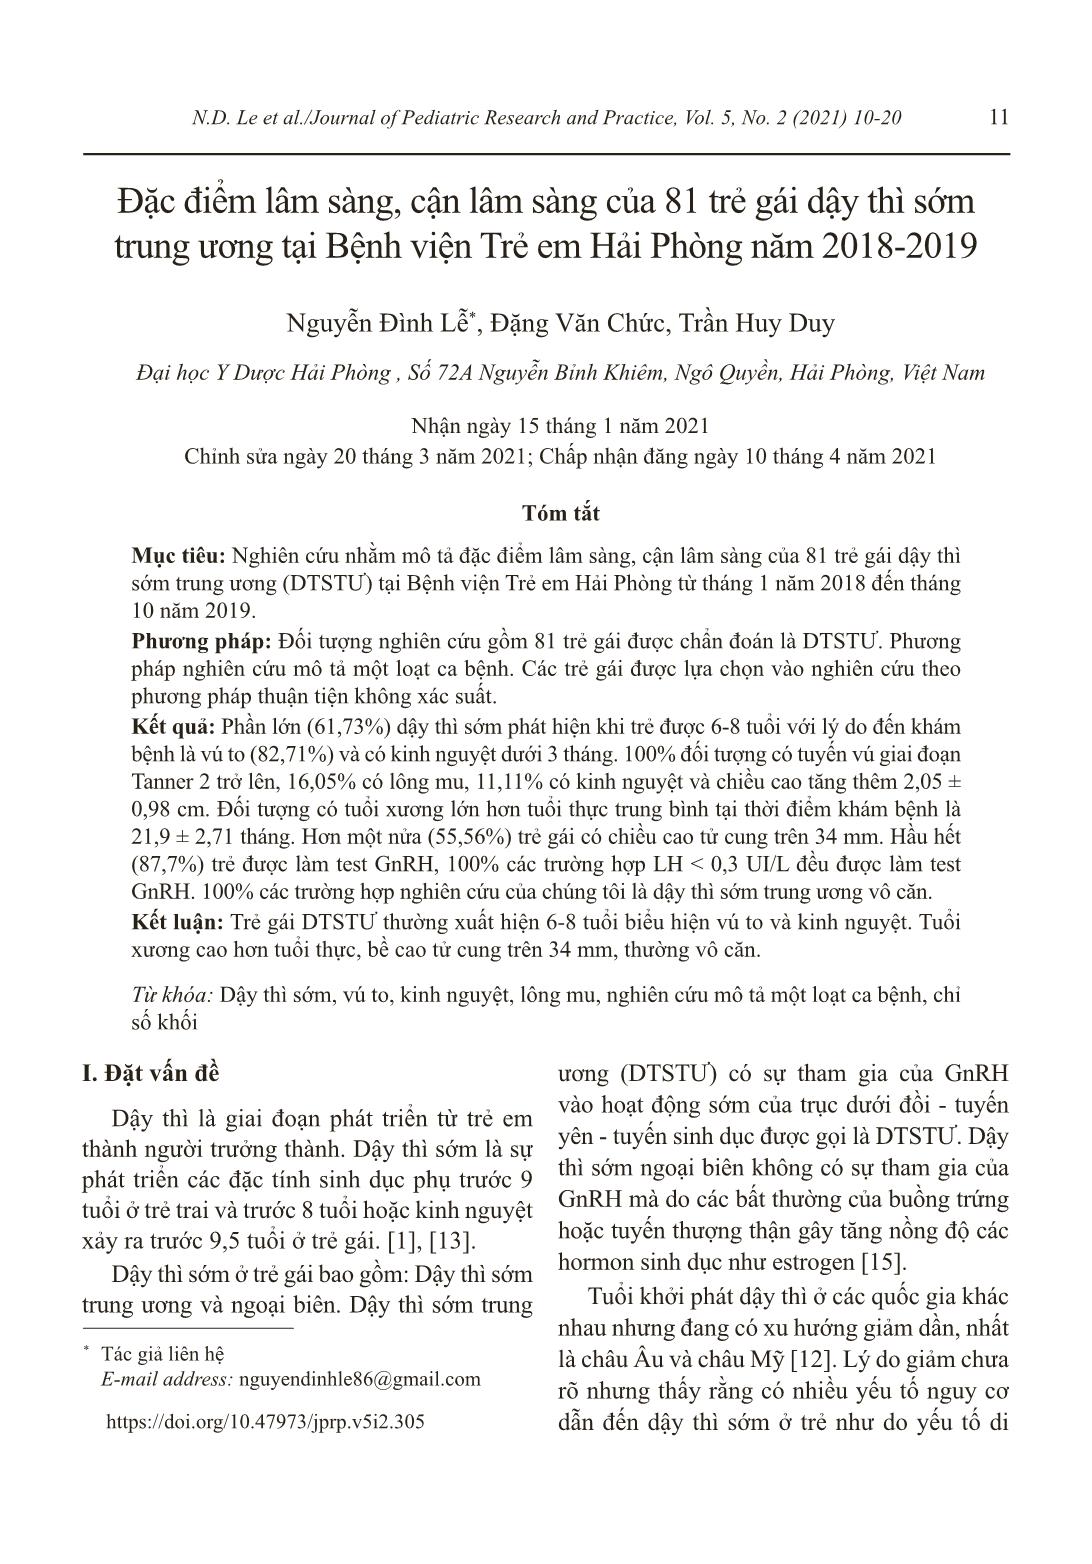 Clinical and Paraclinical Features of 81 Girls with Central Precocious Puberty at Hai Phong Children’s Hospital in 2018-2019 trang 2